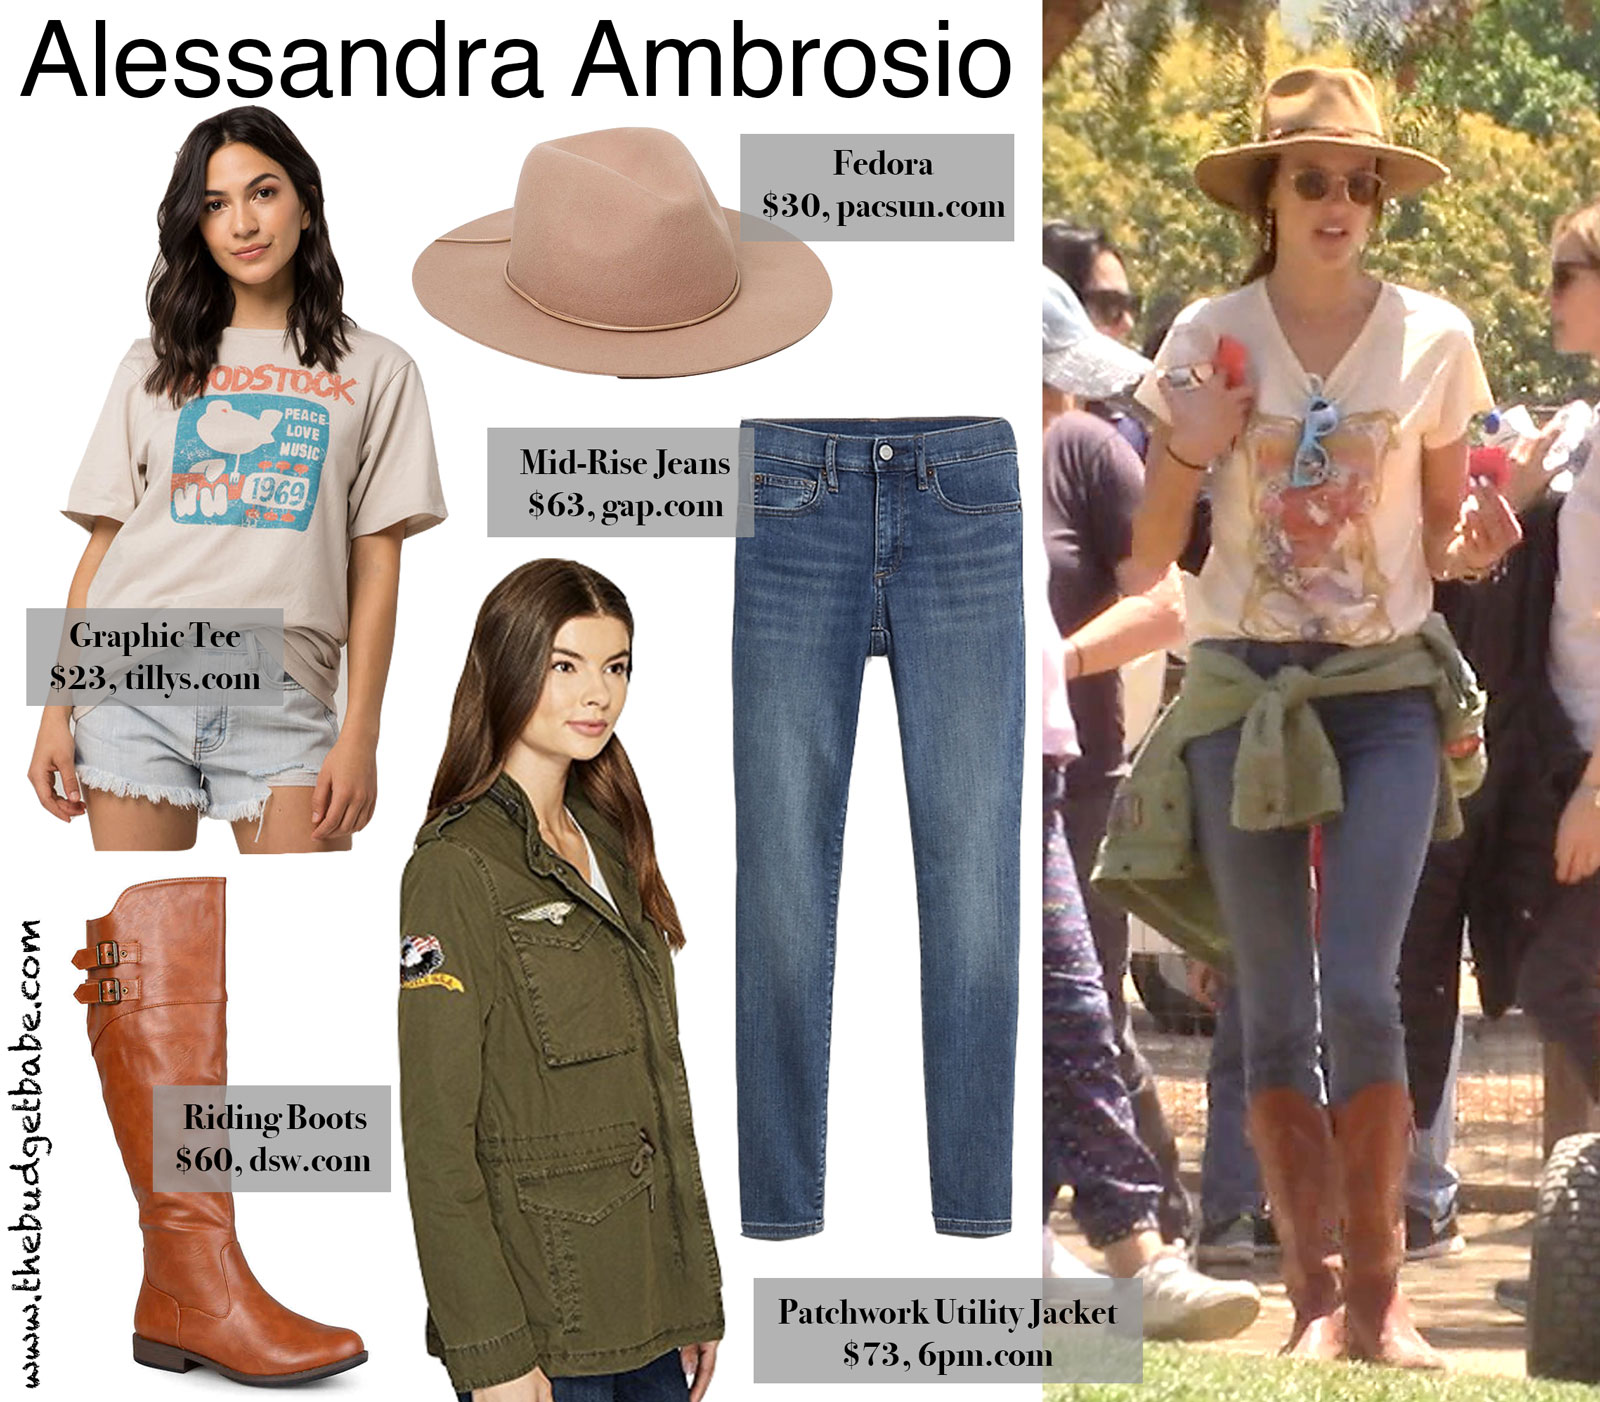 Alessandra Ambrosio Graphic Tee and Fedora Look for Less